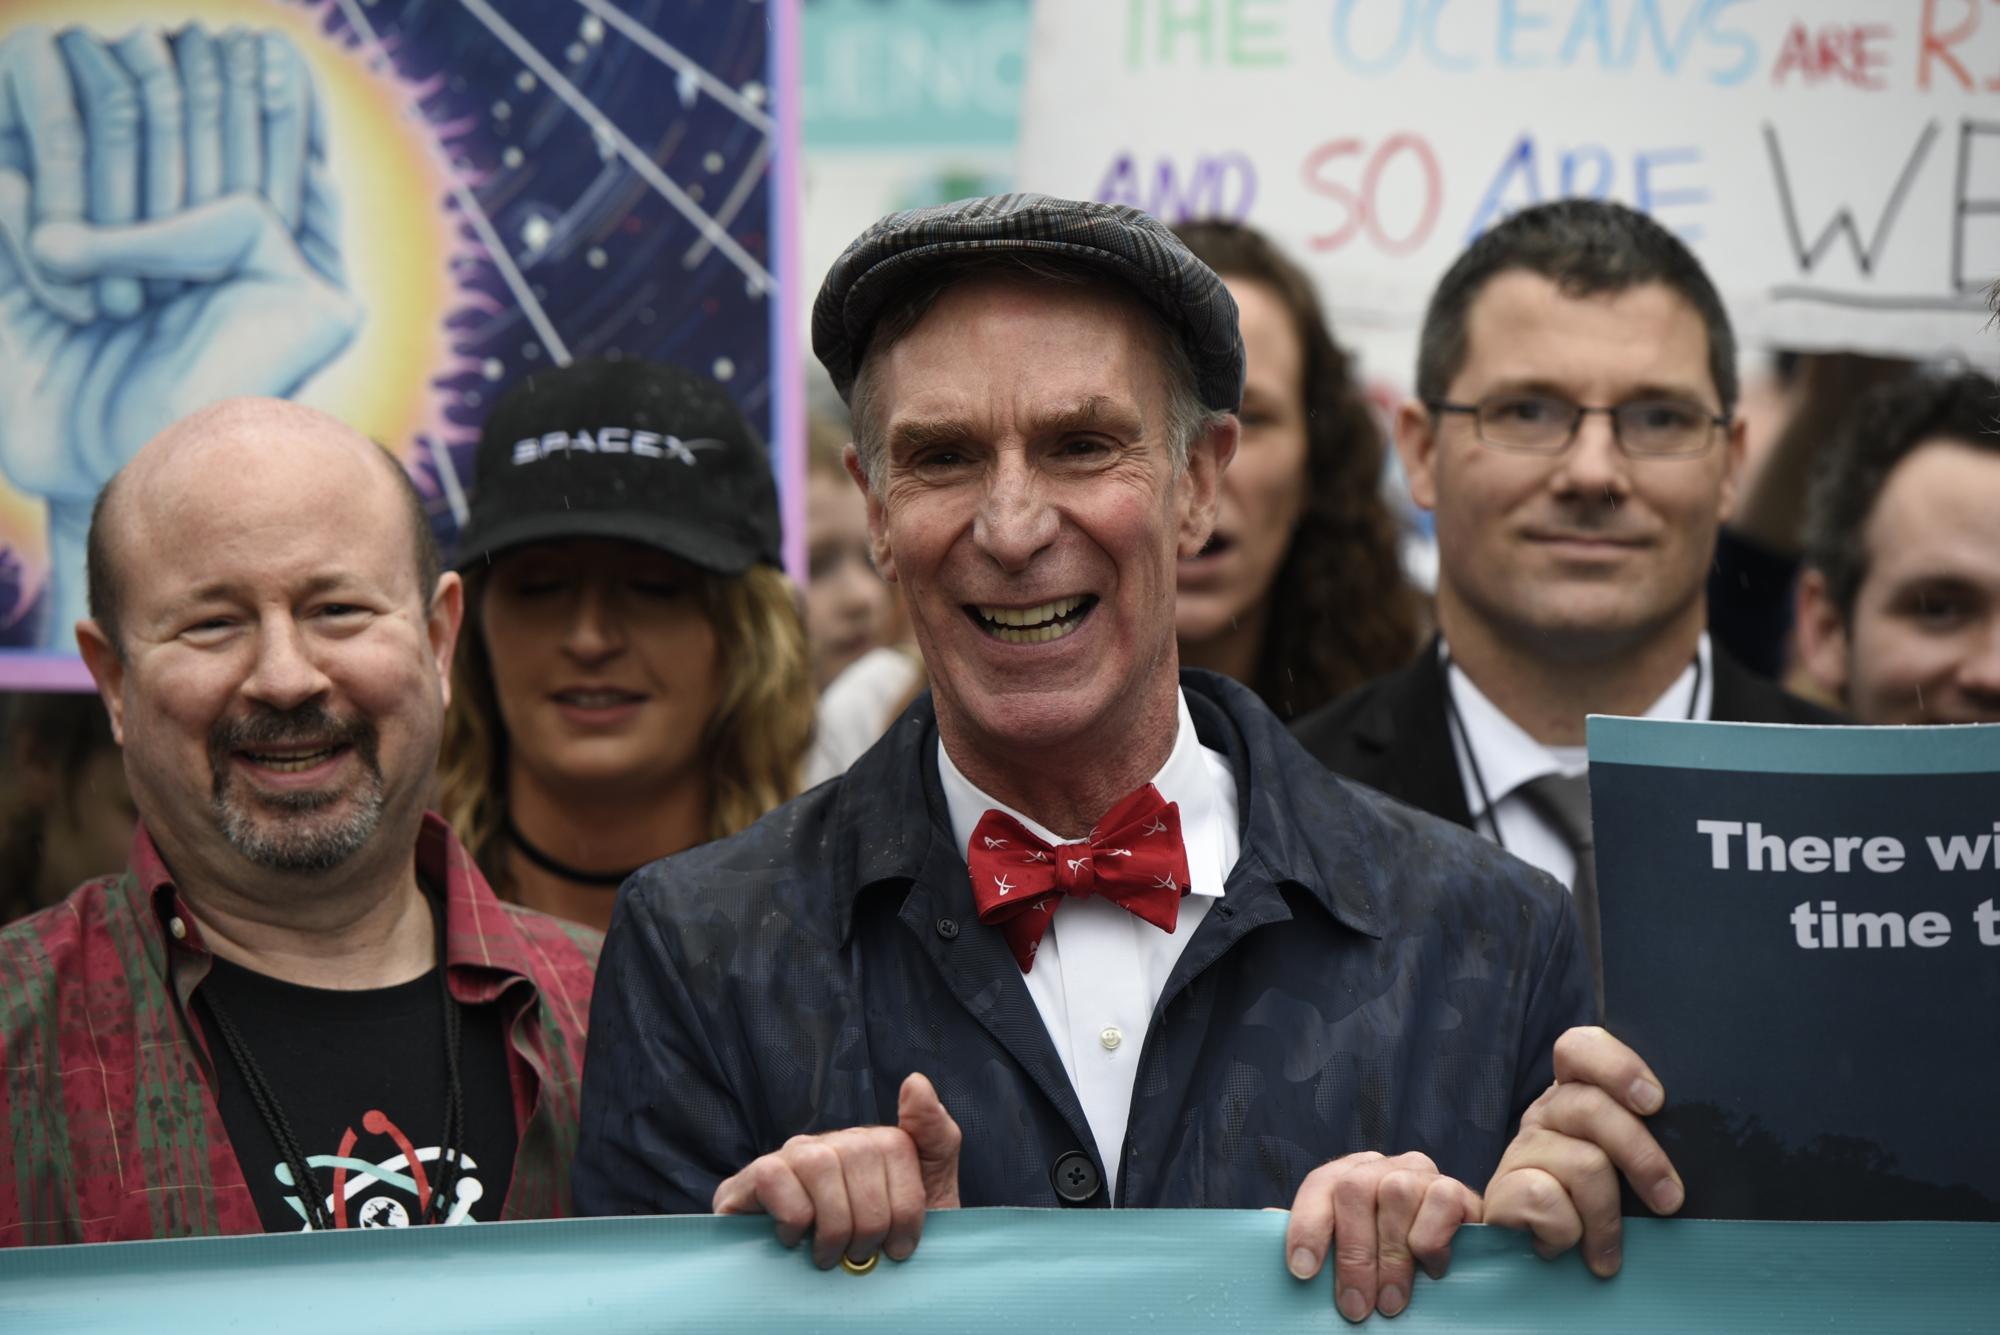 FILE - Bill Nye "The Science Guy" participates in the March for Science in Washington, April 22, 2017. "I'm so old. I was at the first Earth Day. I grew up in the city of Washington, D.C.," says engineer-turned science communicator-turned climate activist Nye, 67. (AP Photo/Sait Serkan Gurbuz, File)